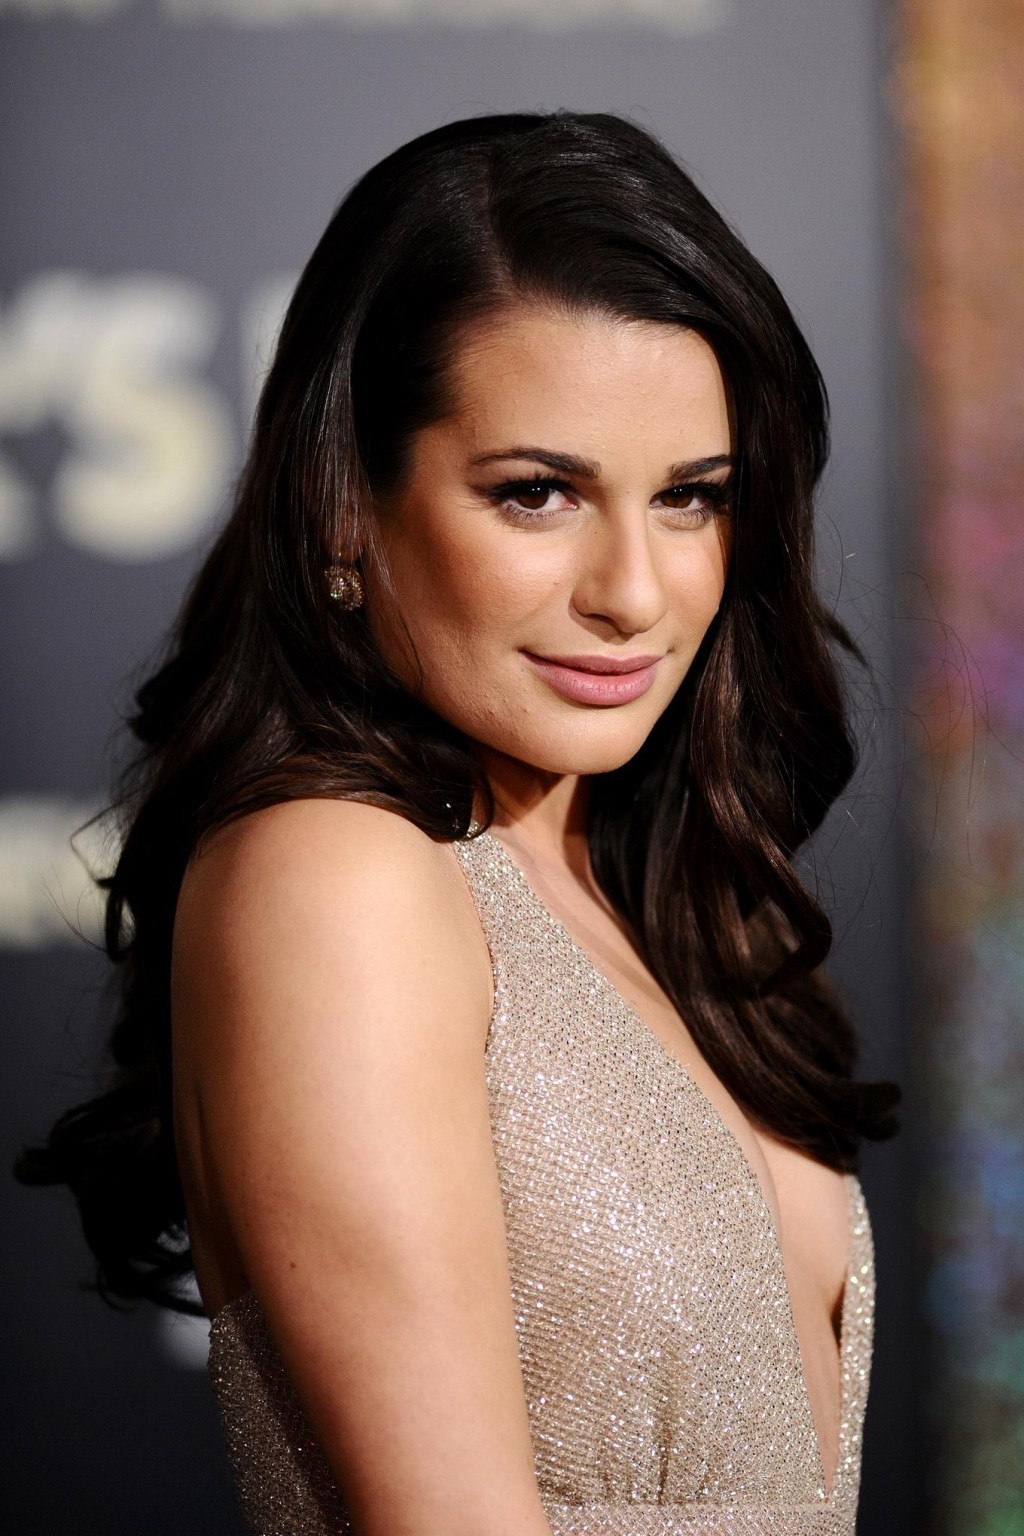 Lea Michele braless showing side boob at the 'New Year's Eve' premiere in LA #75279873